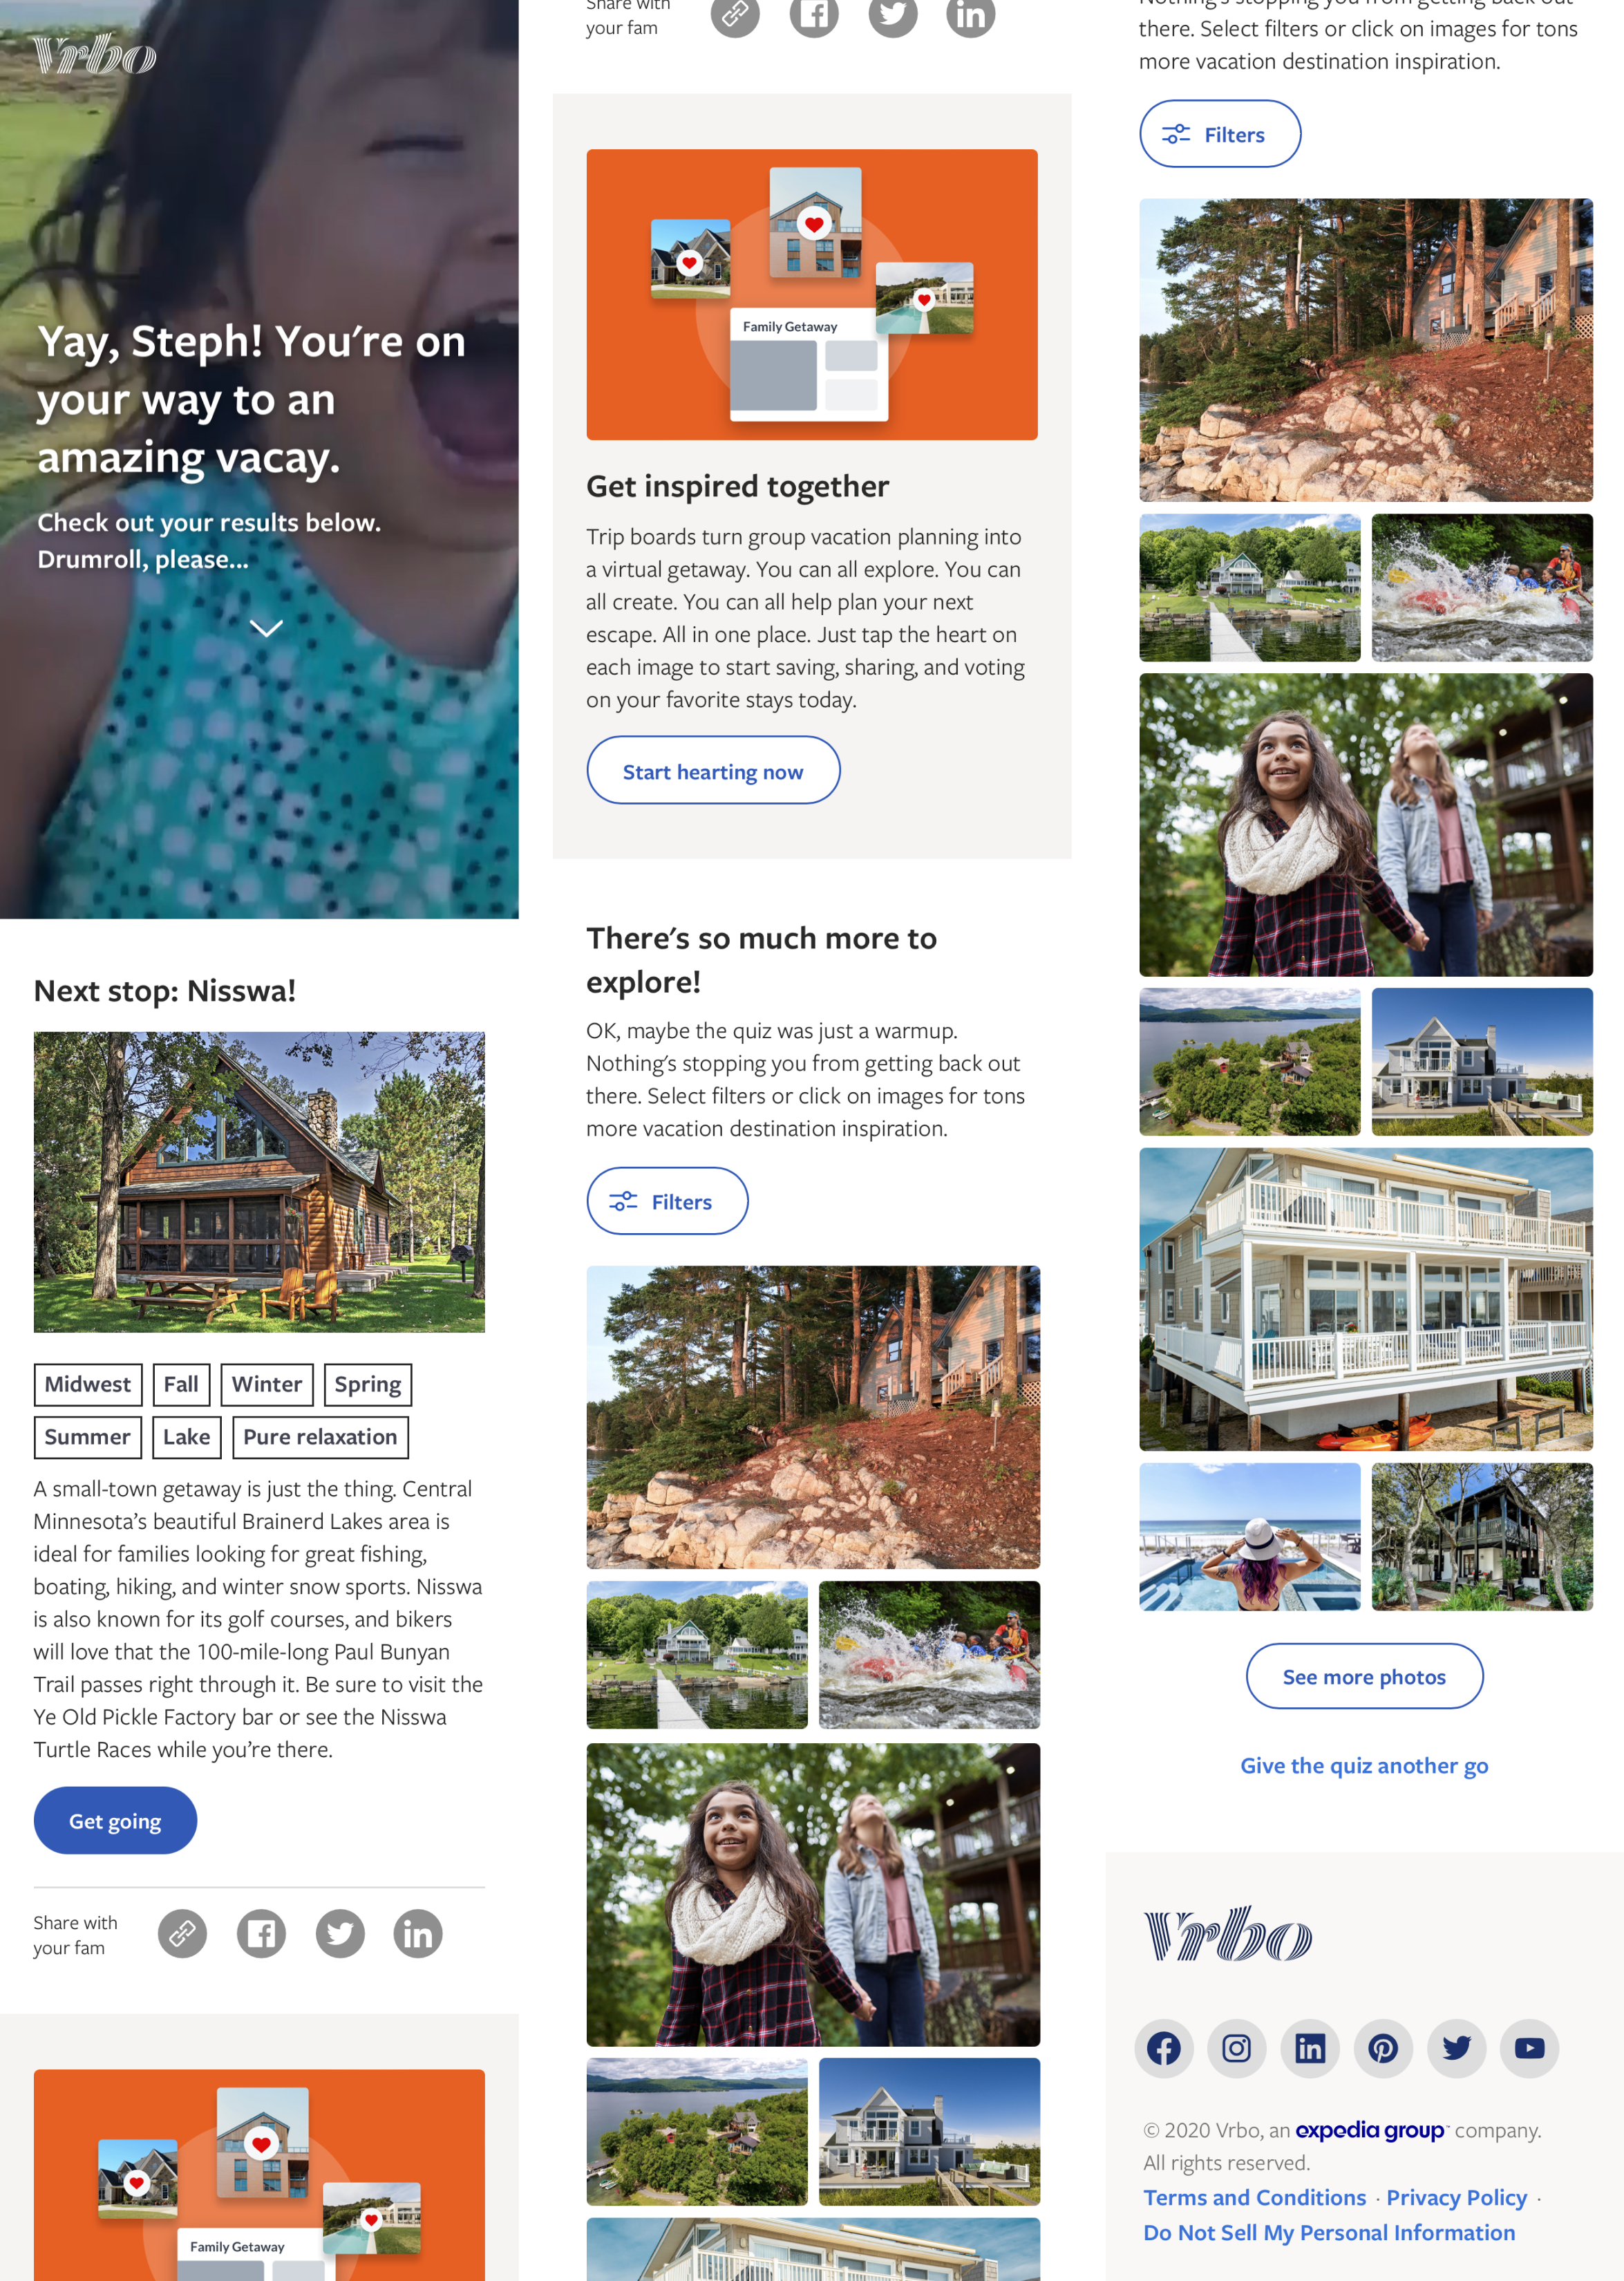 Design mockups showing results of Vrbo Vacation Generator quiz. A girl smiles in the hero section; a log cabin in Nisswa is the generated result.